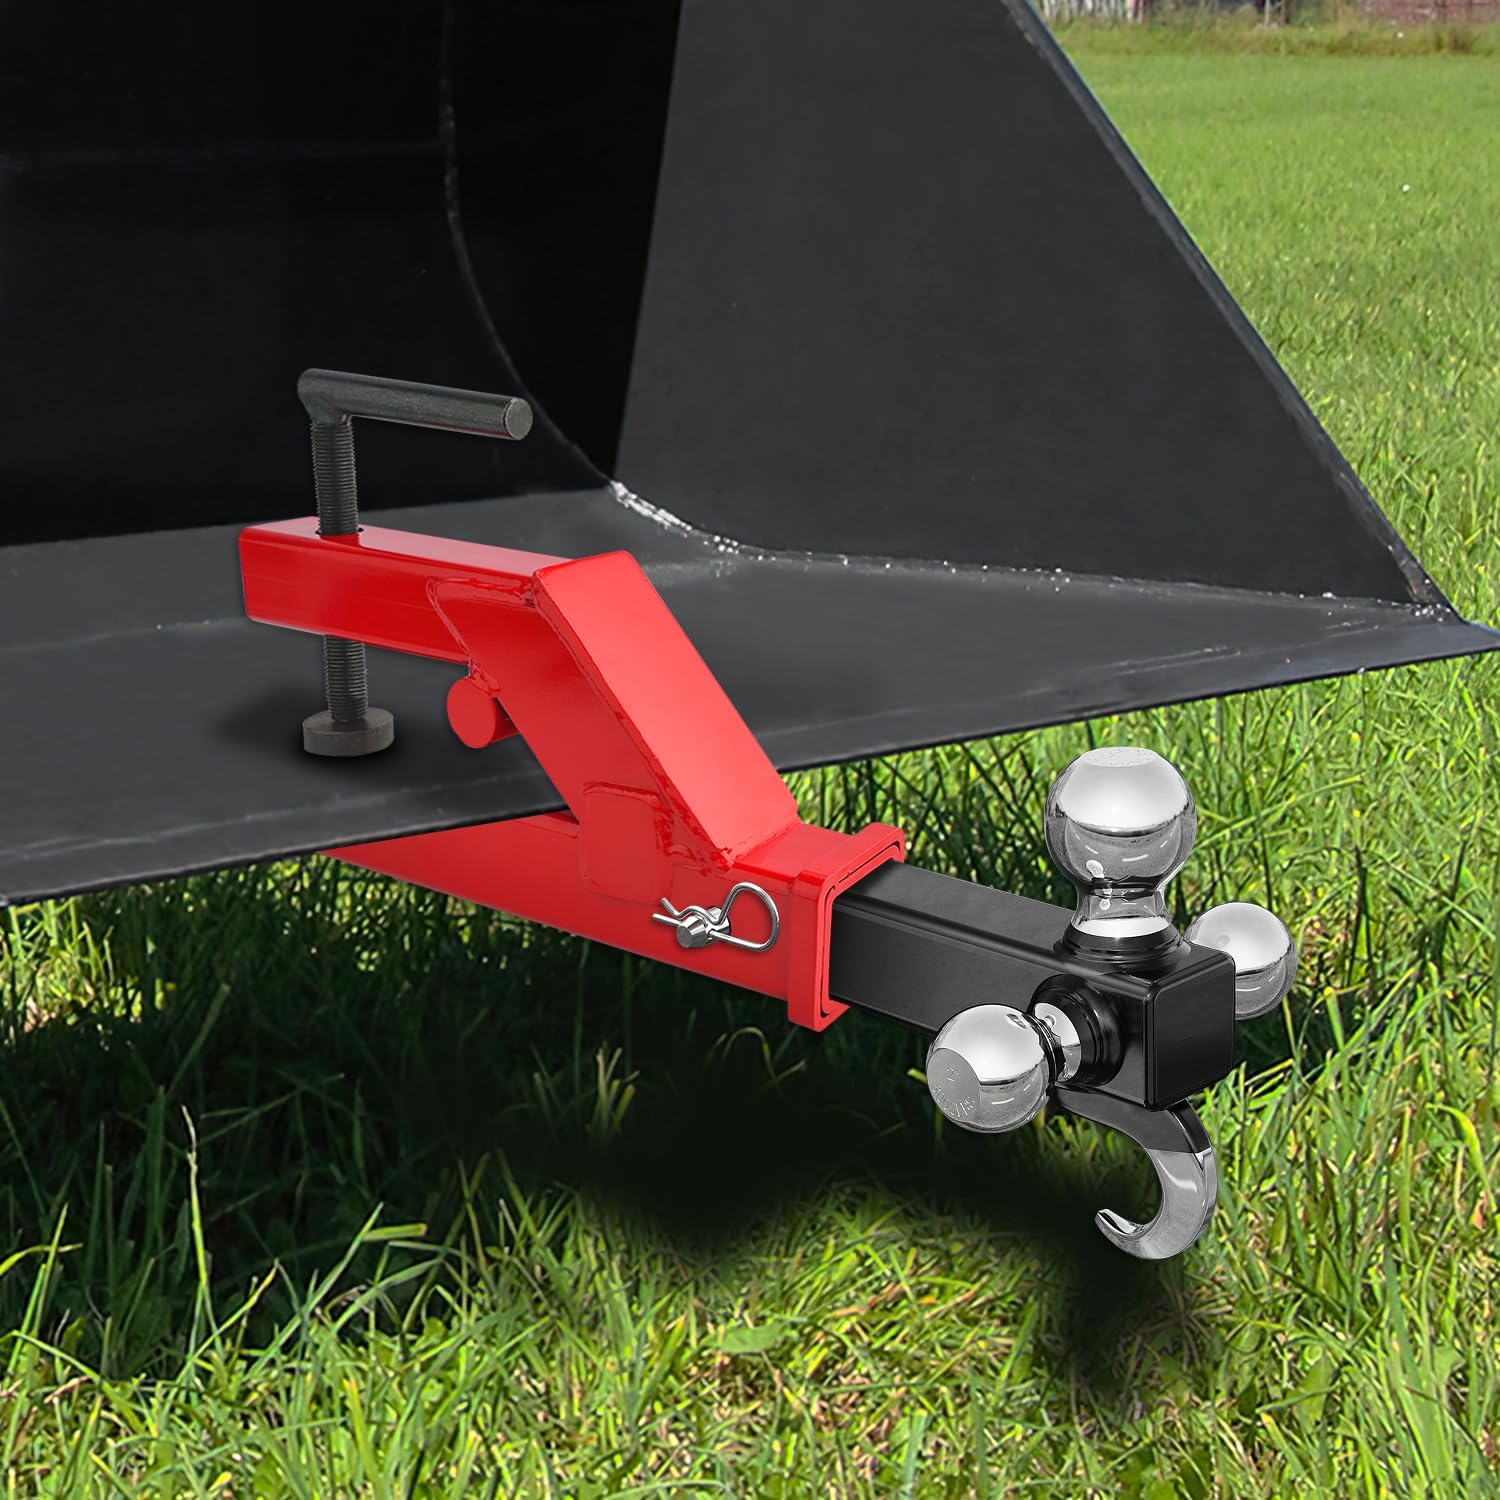 Clamp On Trailer Hitch 2" Ball Mount Receiver Tractor Bucket Nilight